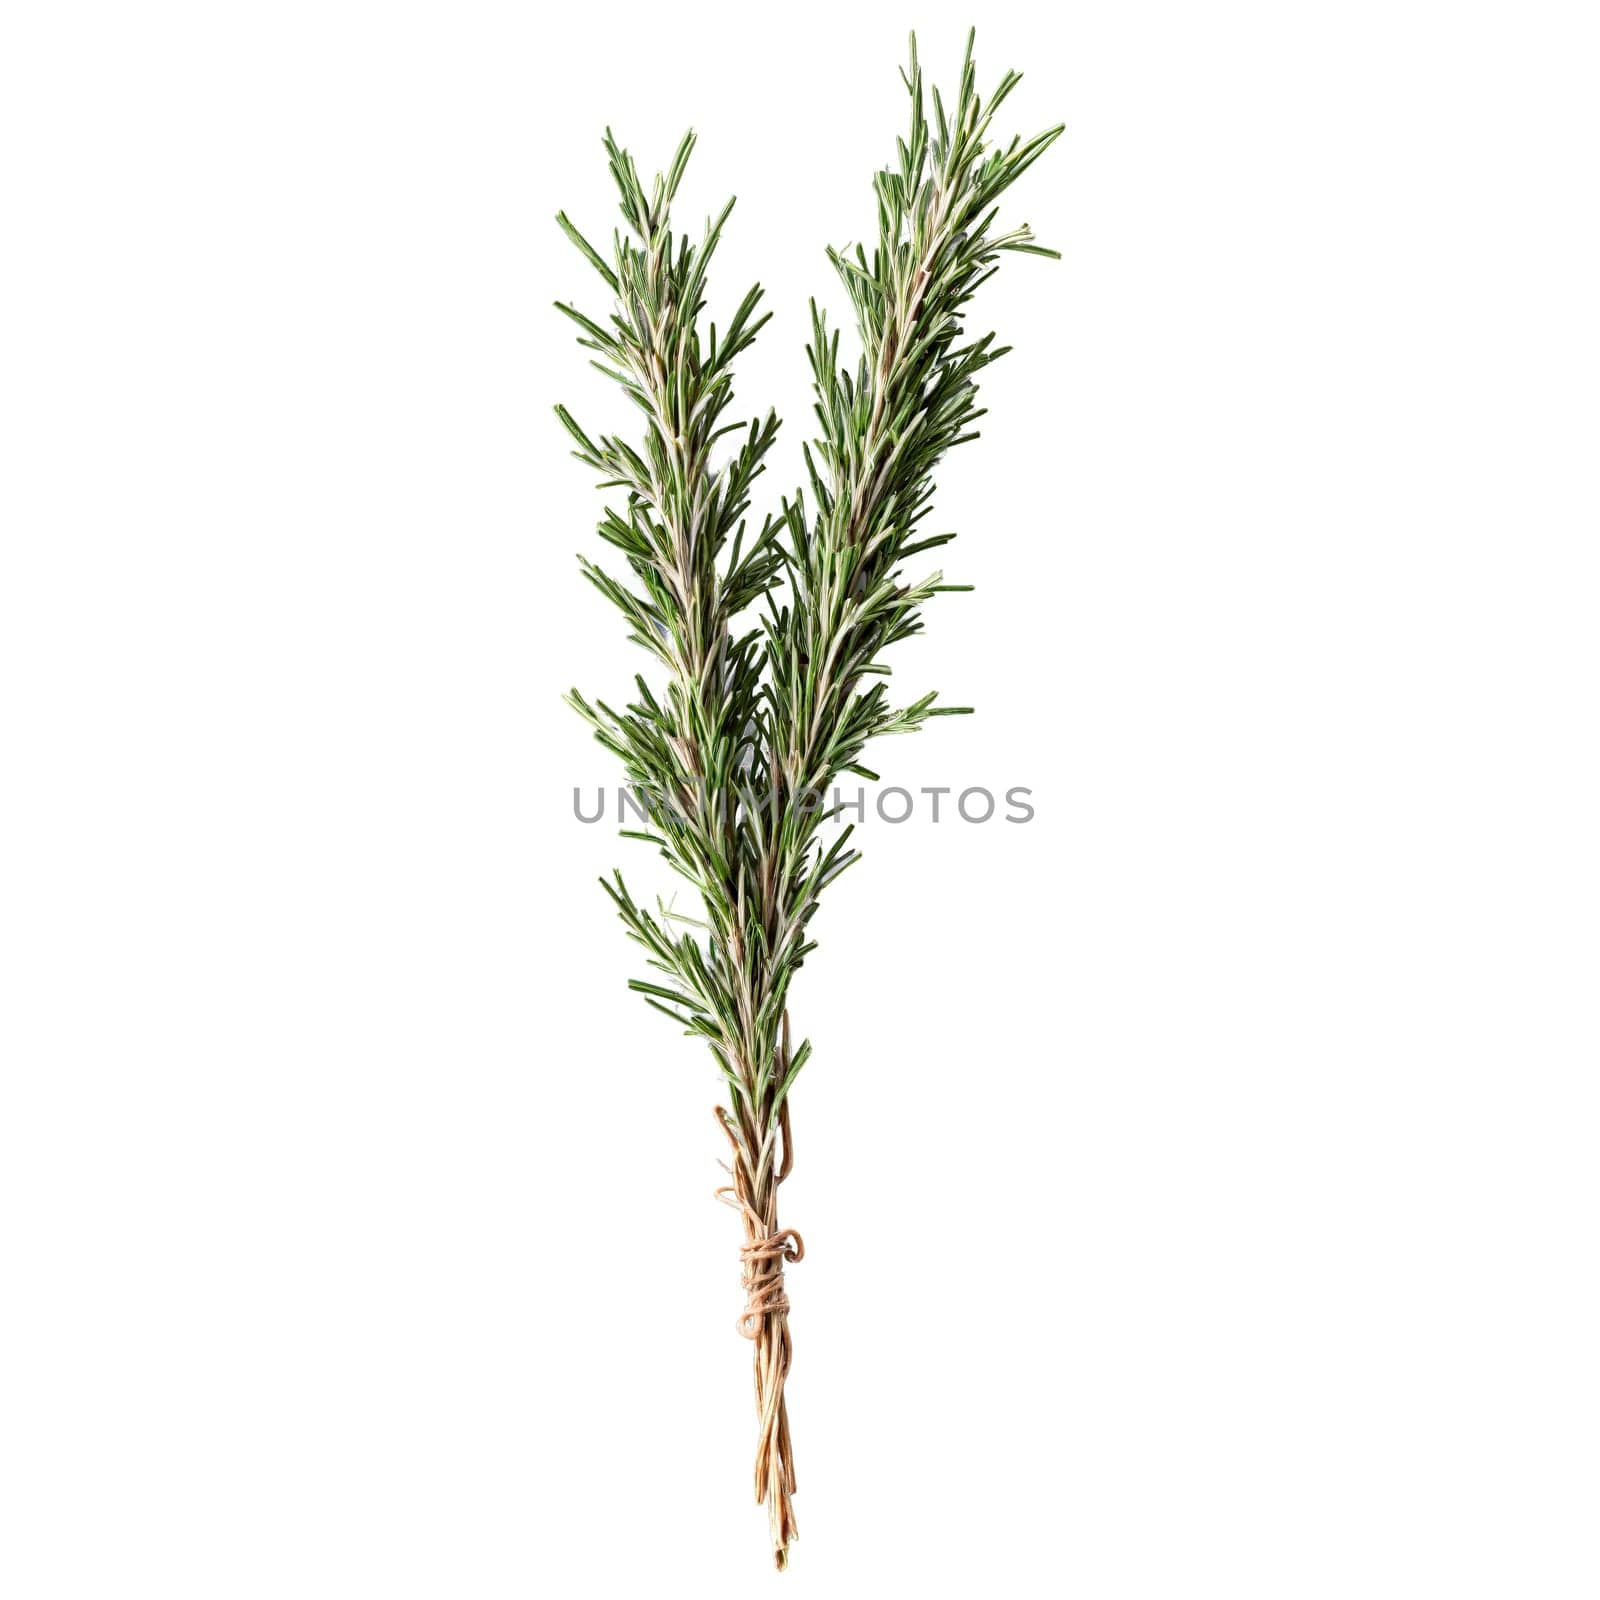 Dried rosemary needles dark green color slender leaves woody stems Food and culinary concept by panophotograph